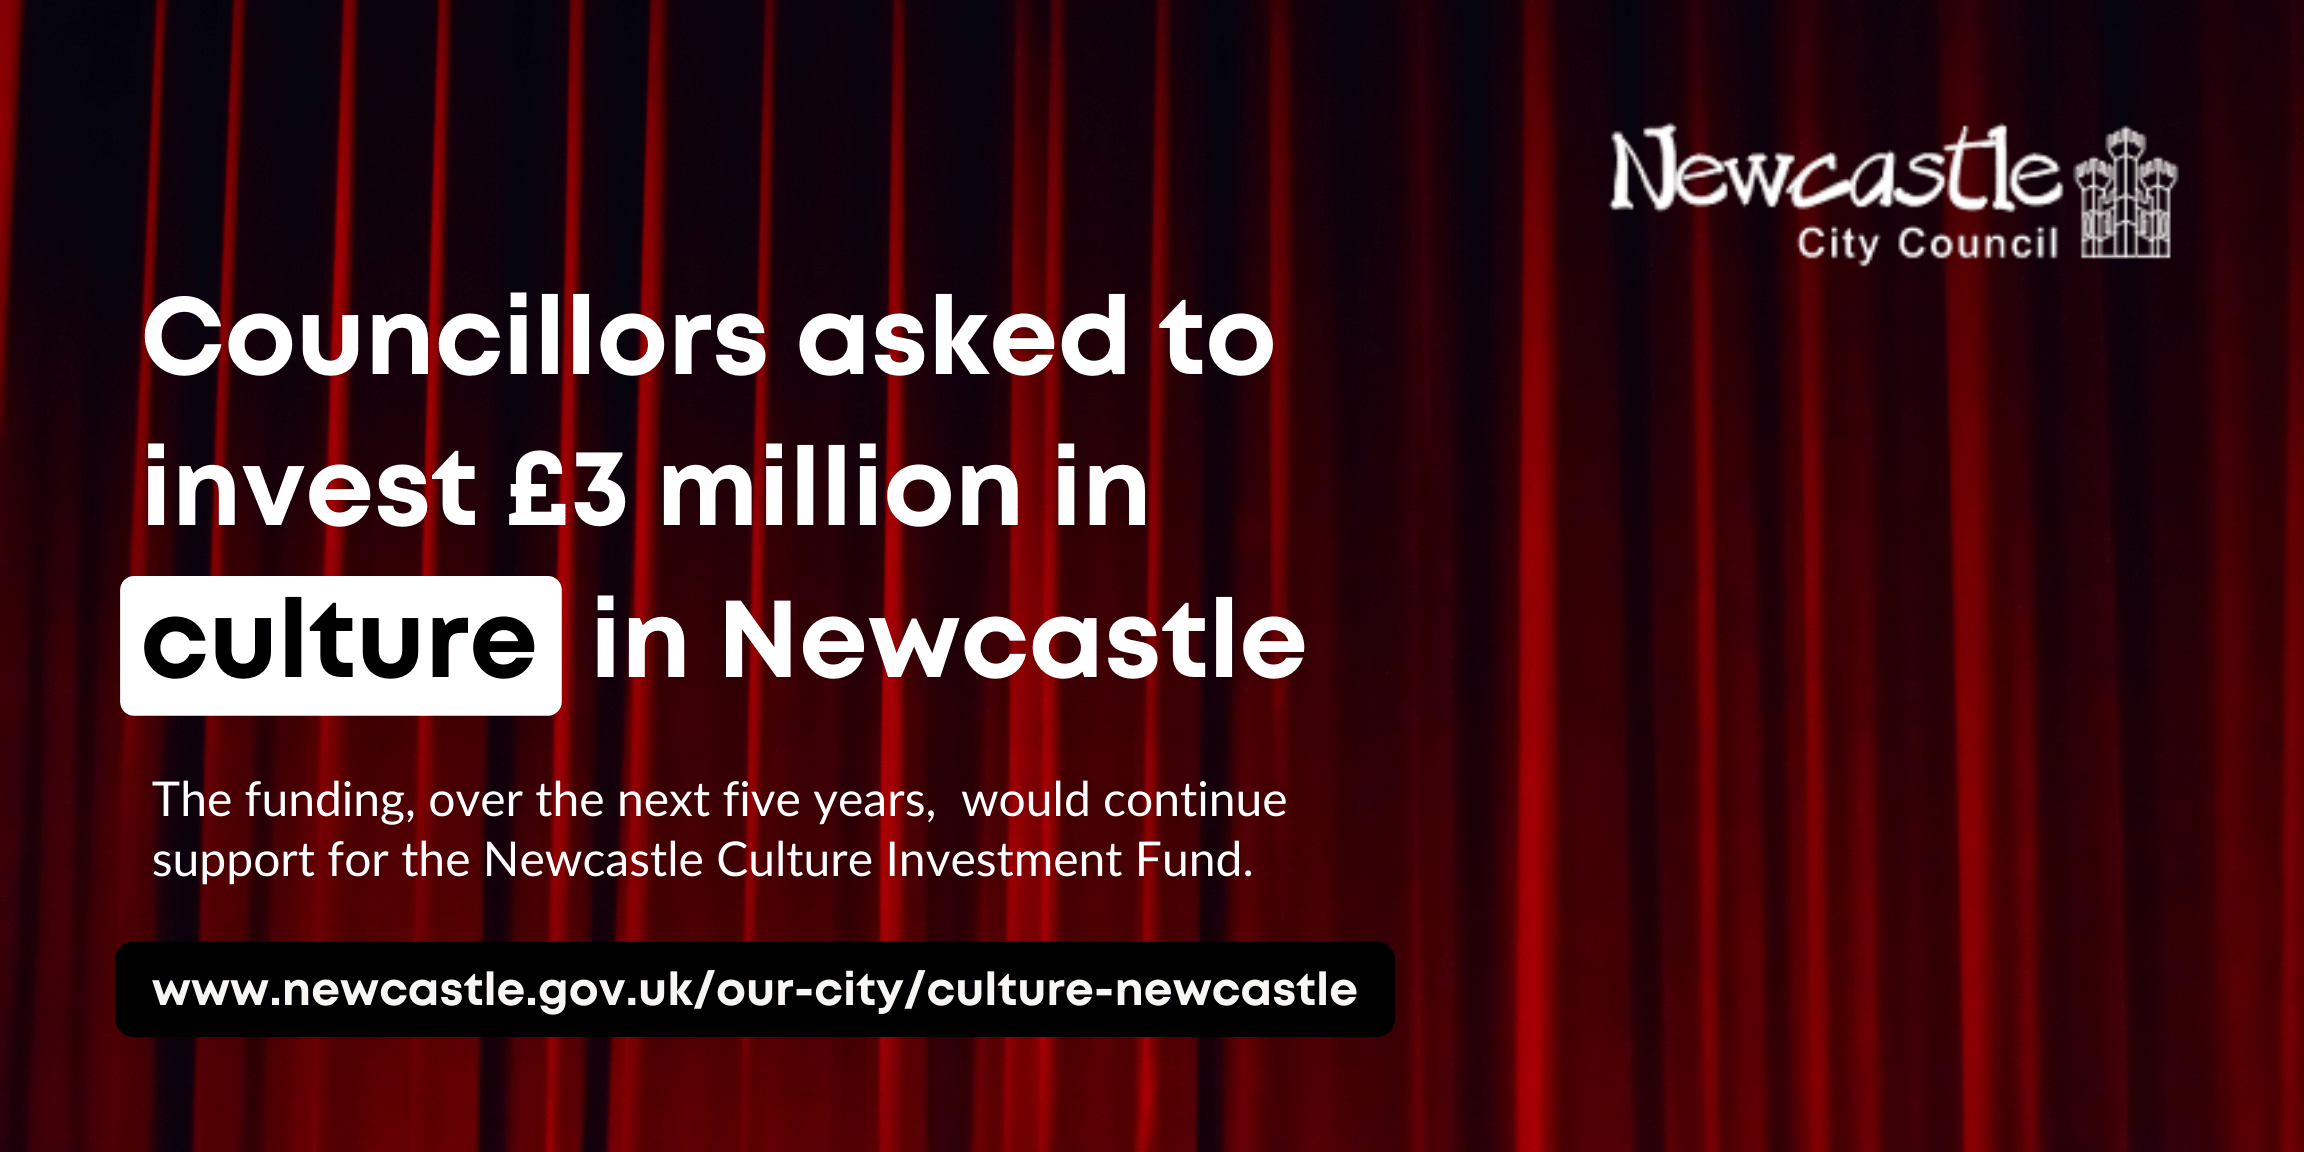 A red curtain with the text Councillors asked to invest £3 million in culture in Newcastle